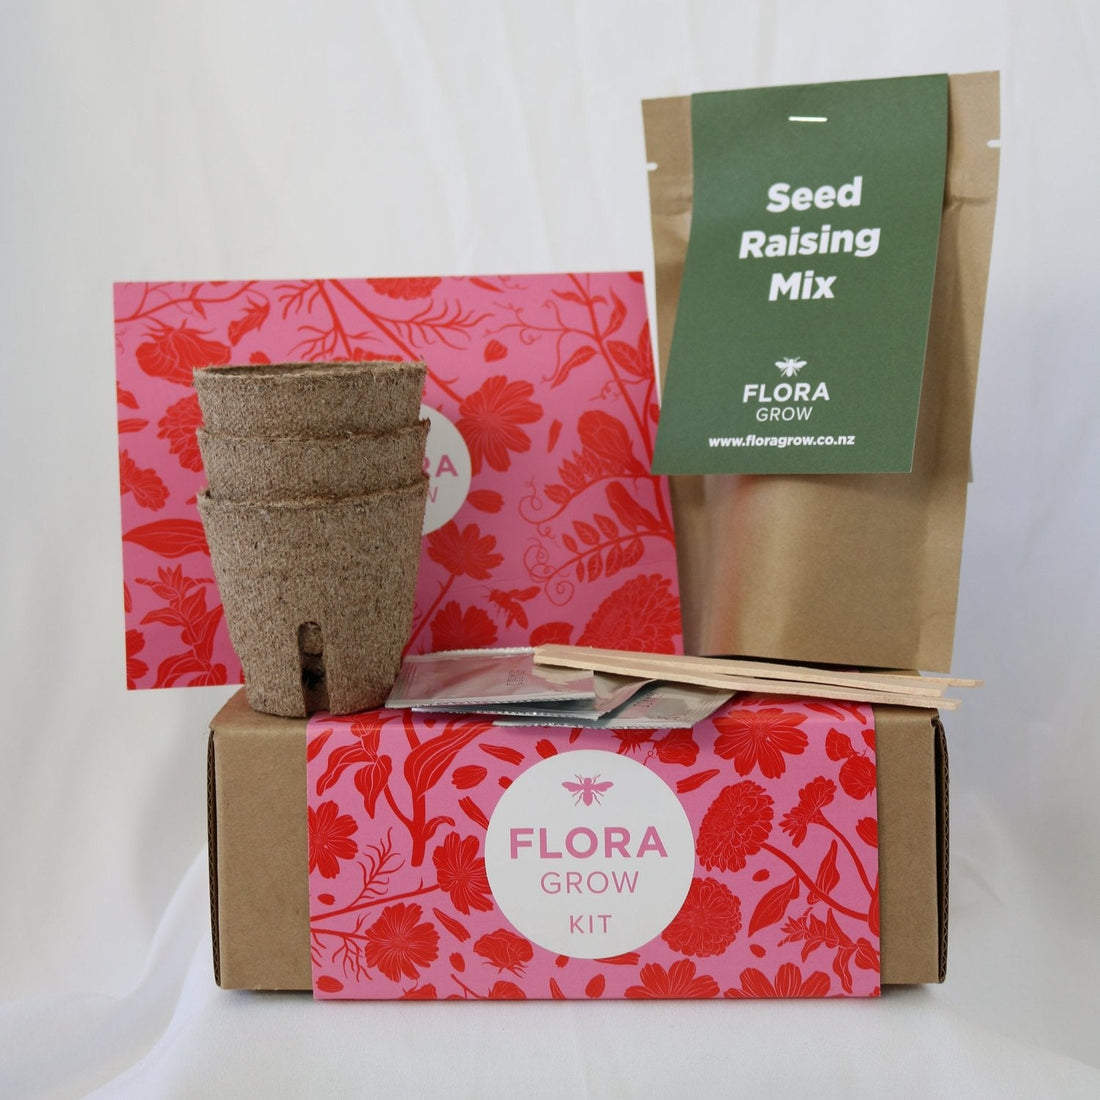 The Cut Flower Seed Kit - The Flower Crate